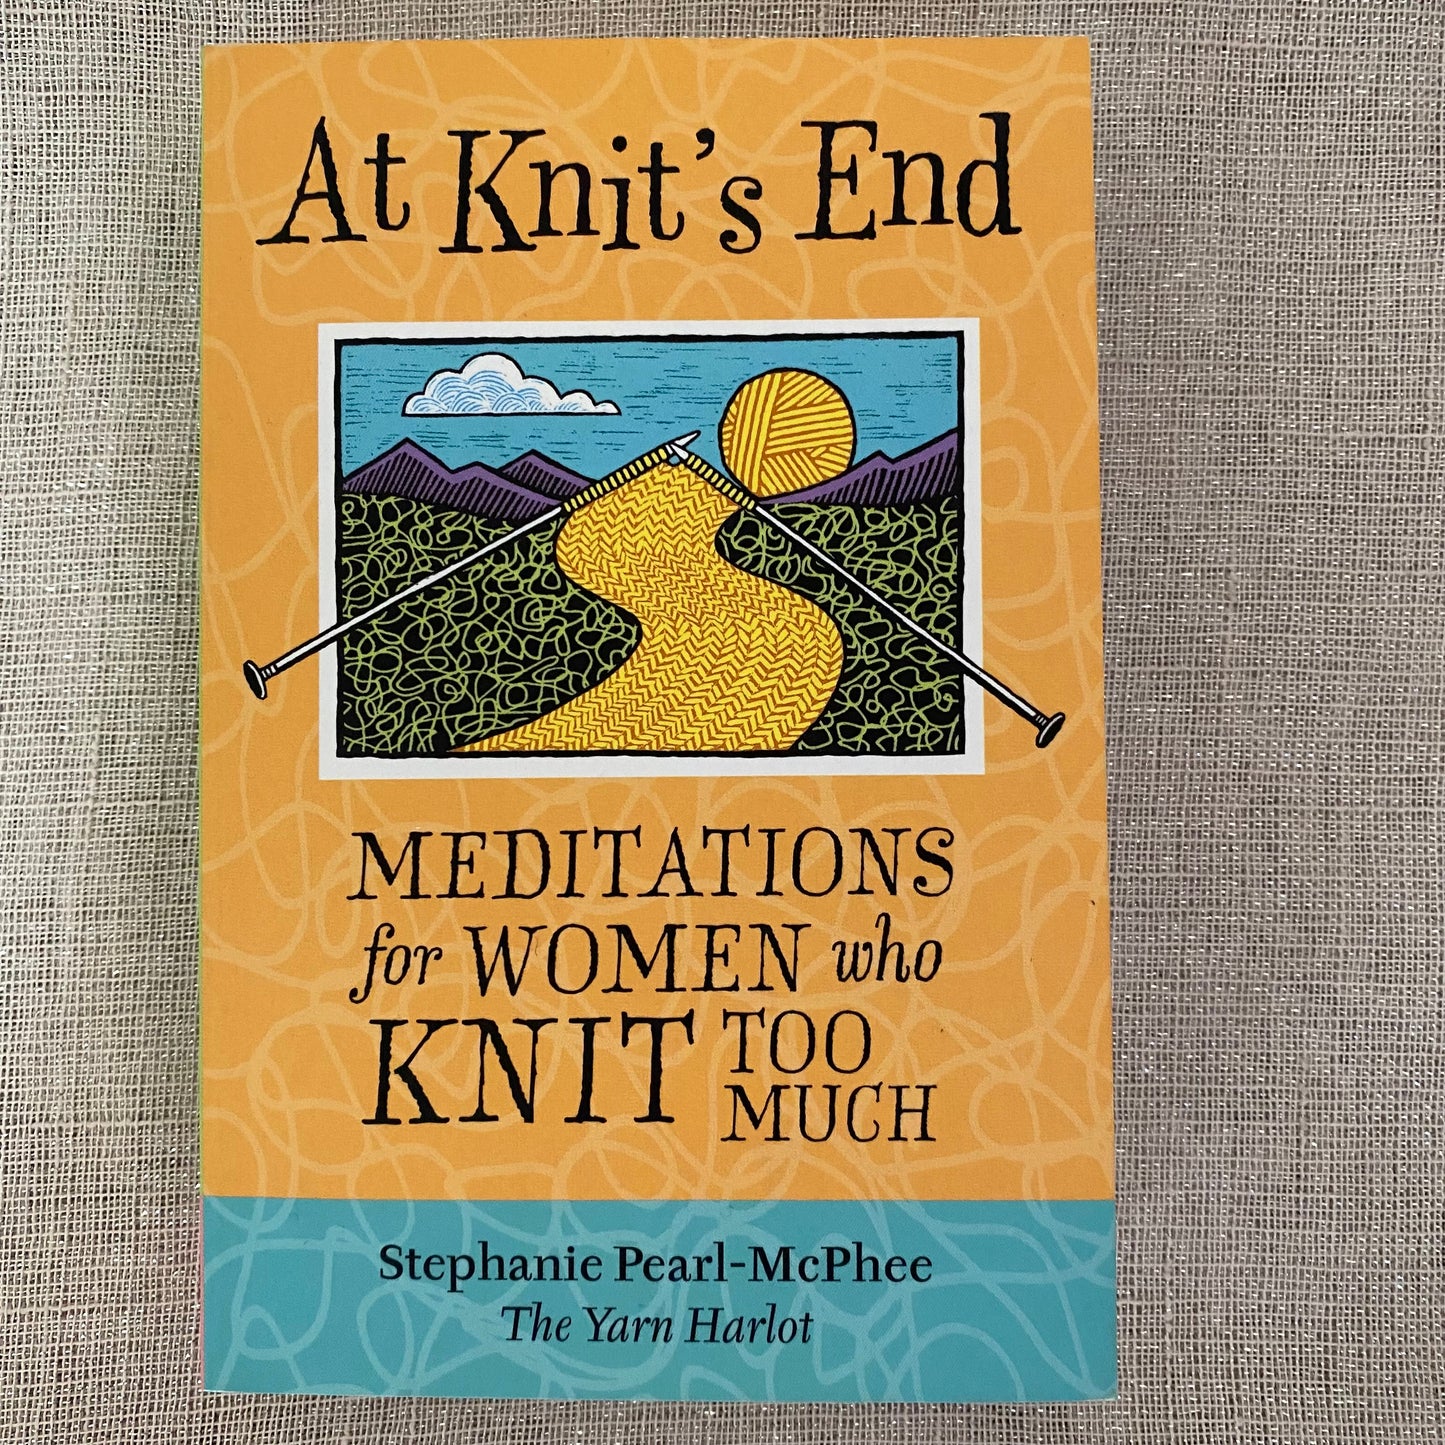 At Knit’s End by Stephanie Pearl-McPhee